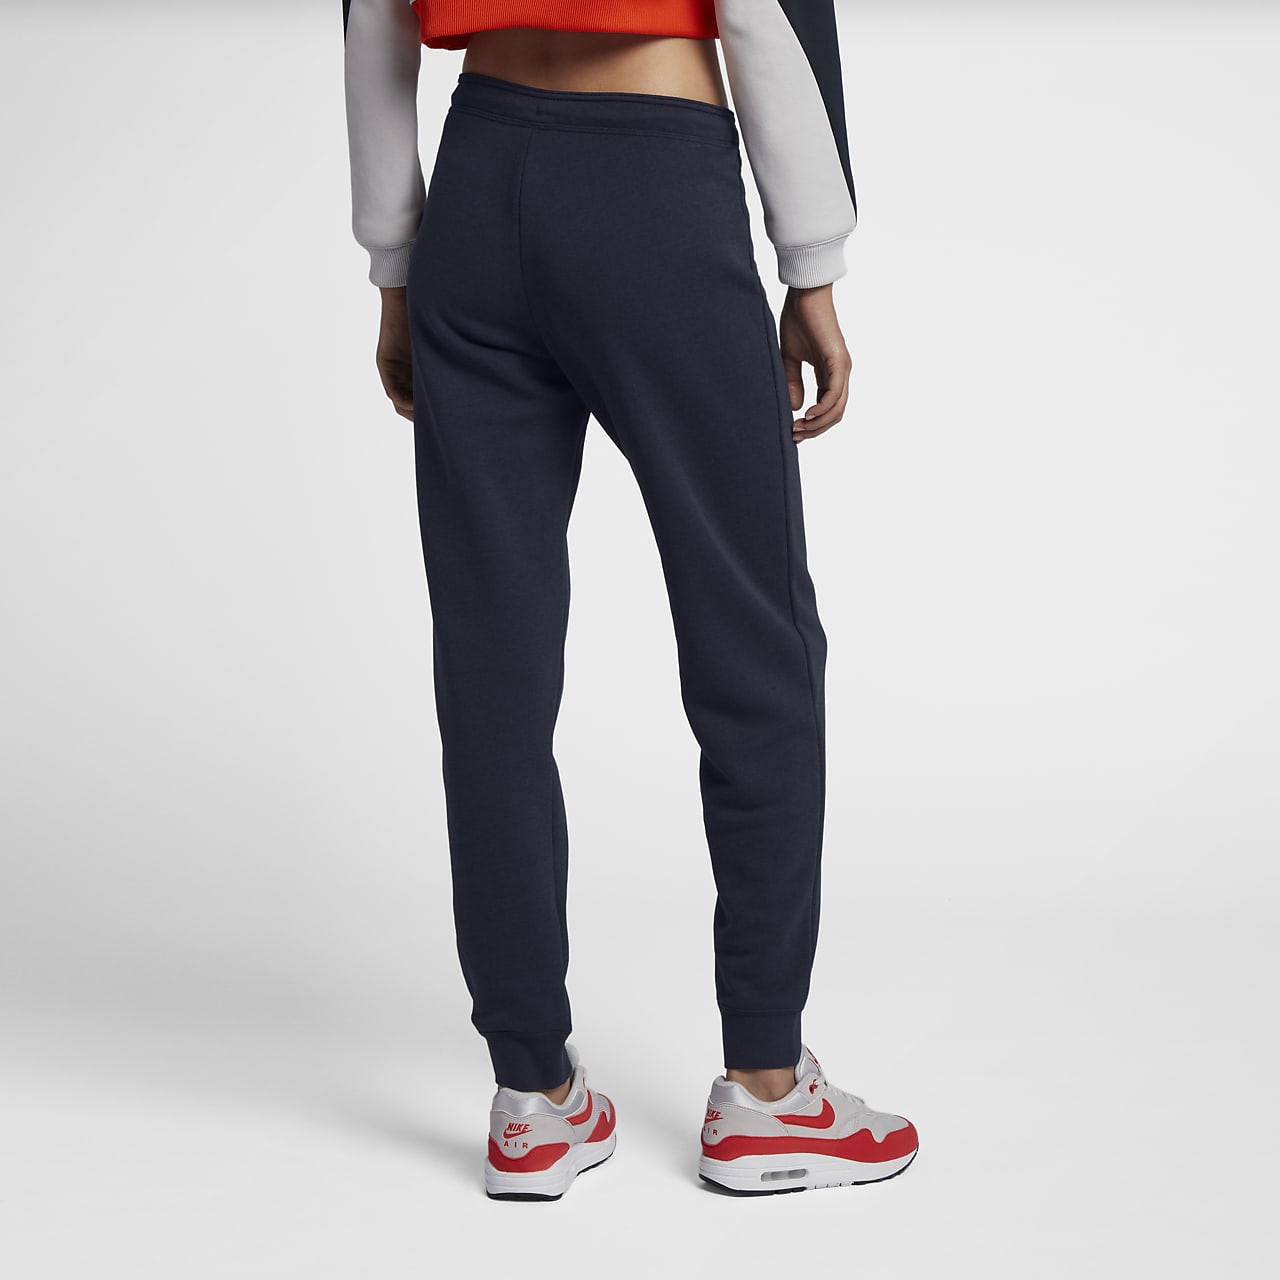 Stay comfortable and stylish with Nike Women's Sportswear Rally Joggers